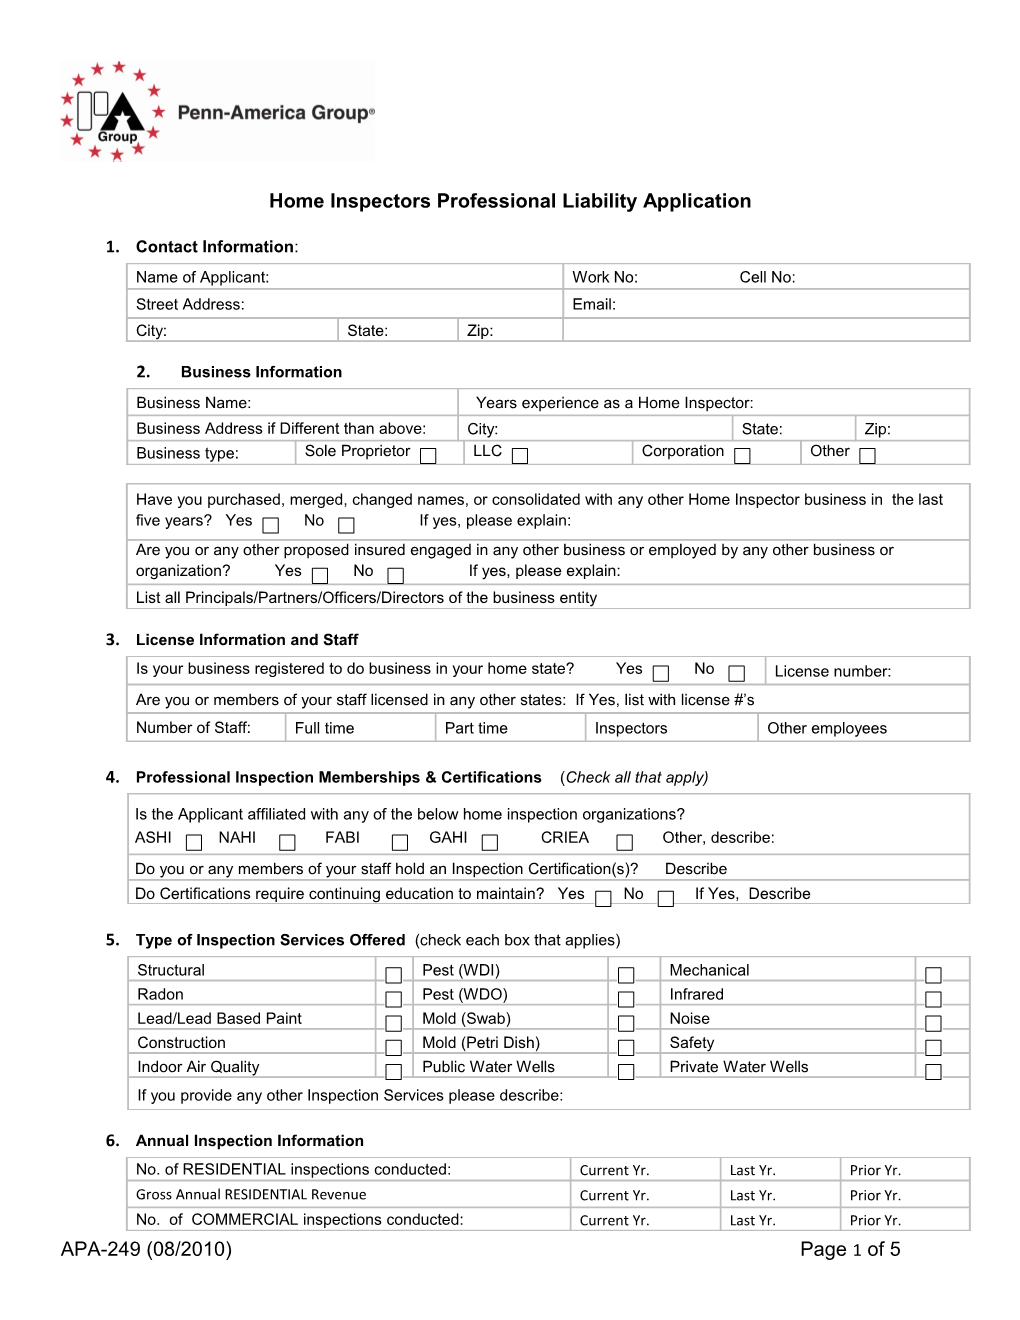 Home Inspector Professional Liability Application